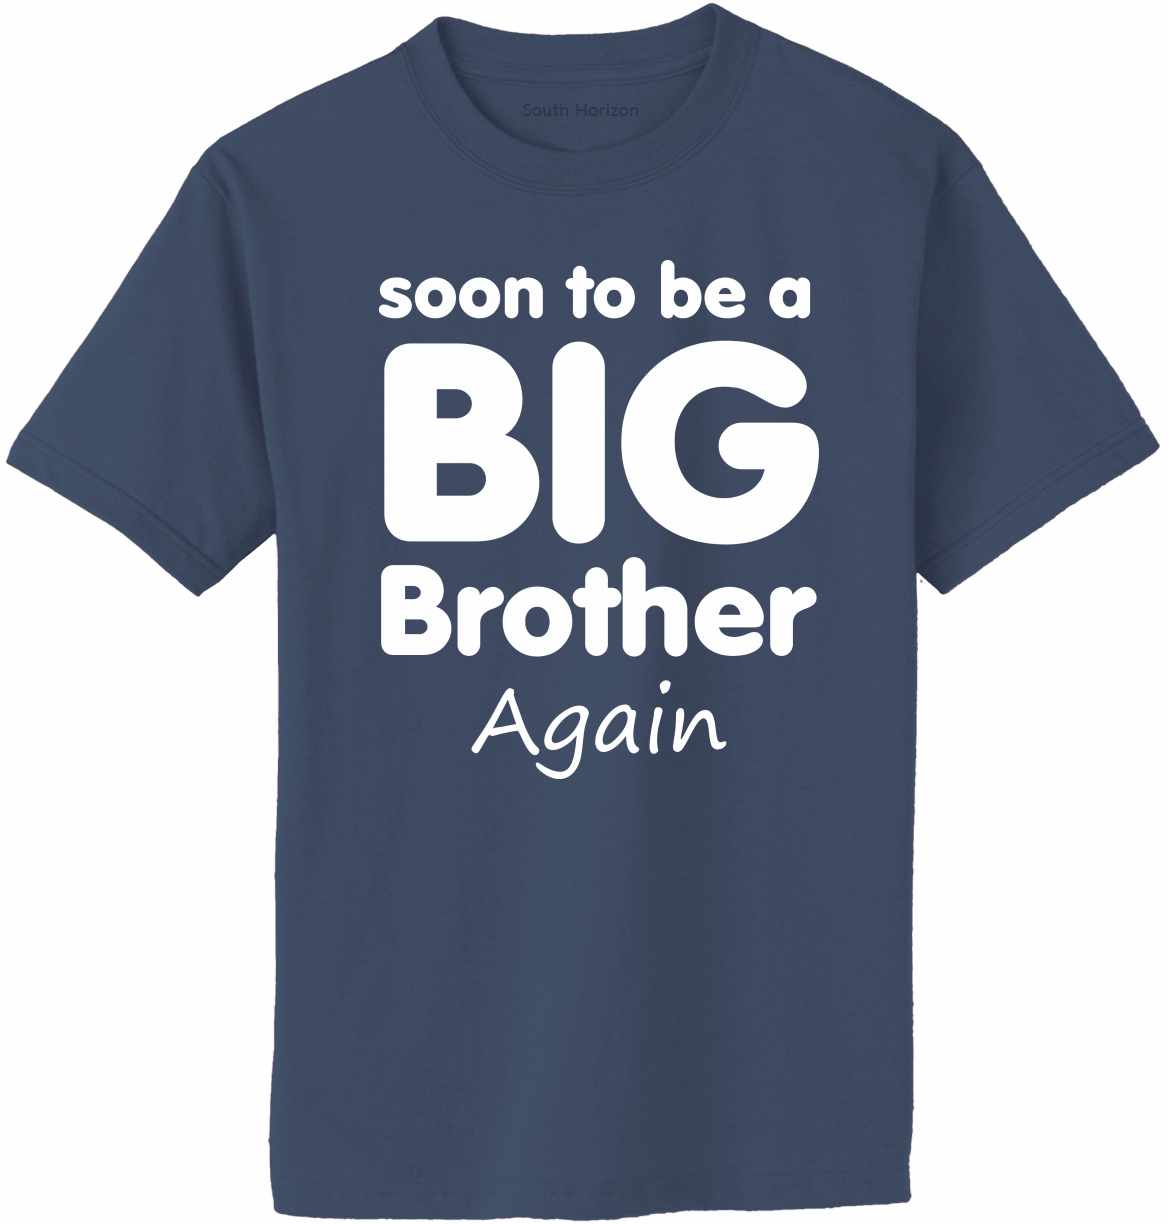 Soon To Be Big Brother Again on Adult T-Shirt